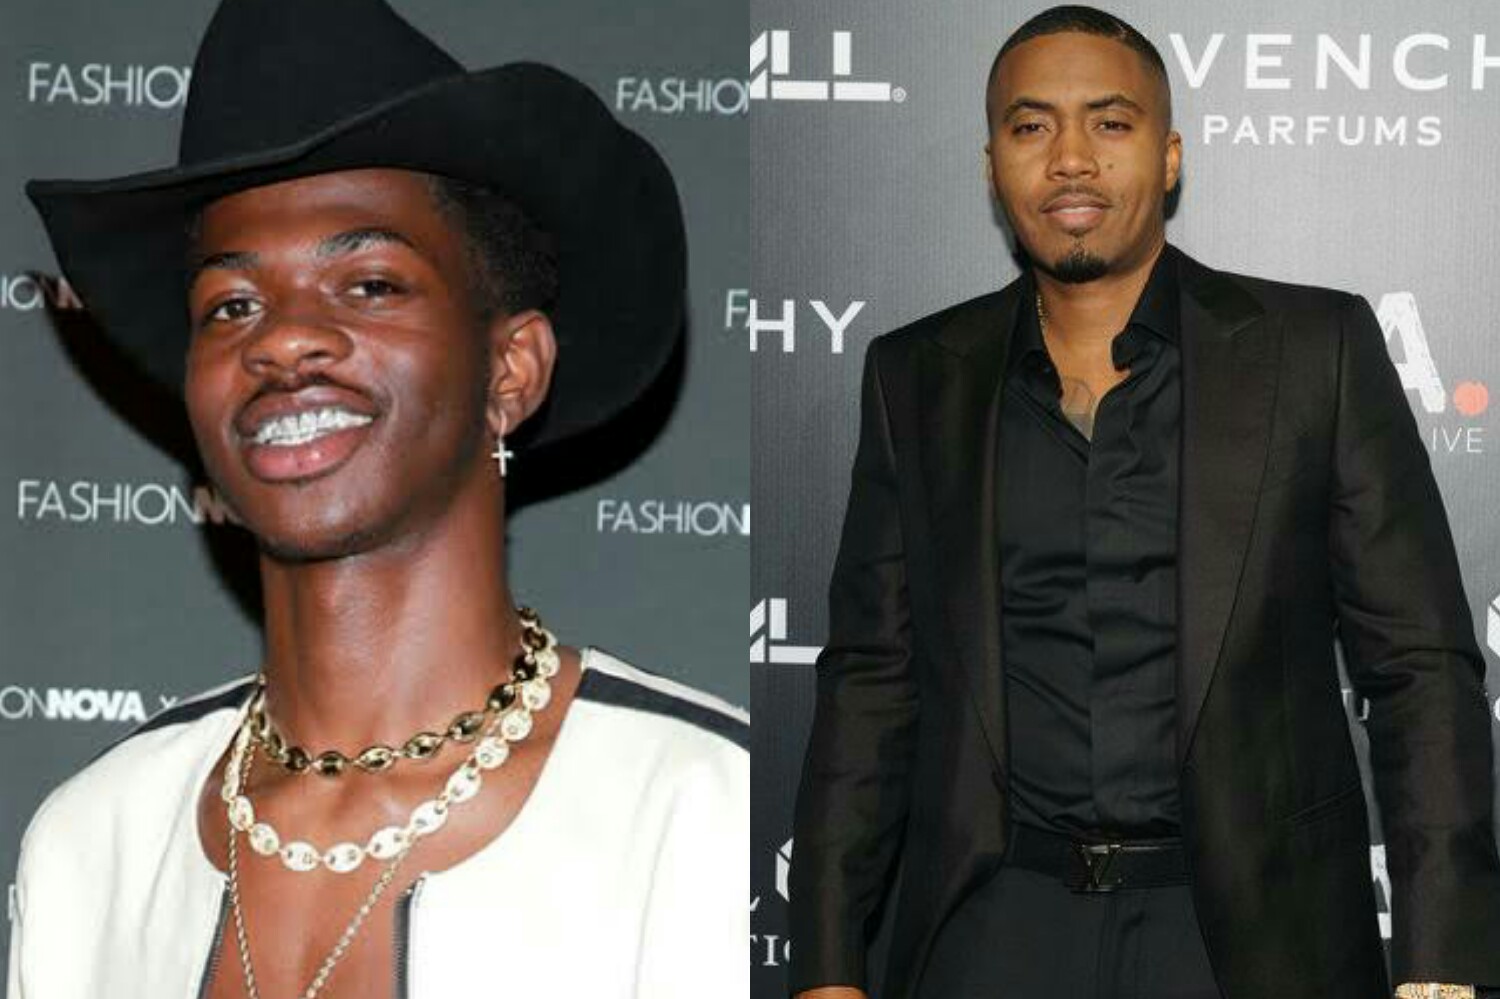 New Song Feat. Lil Nas X and Nas ‘Rodeo’ Remix - Listen